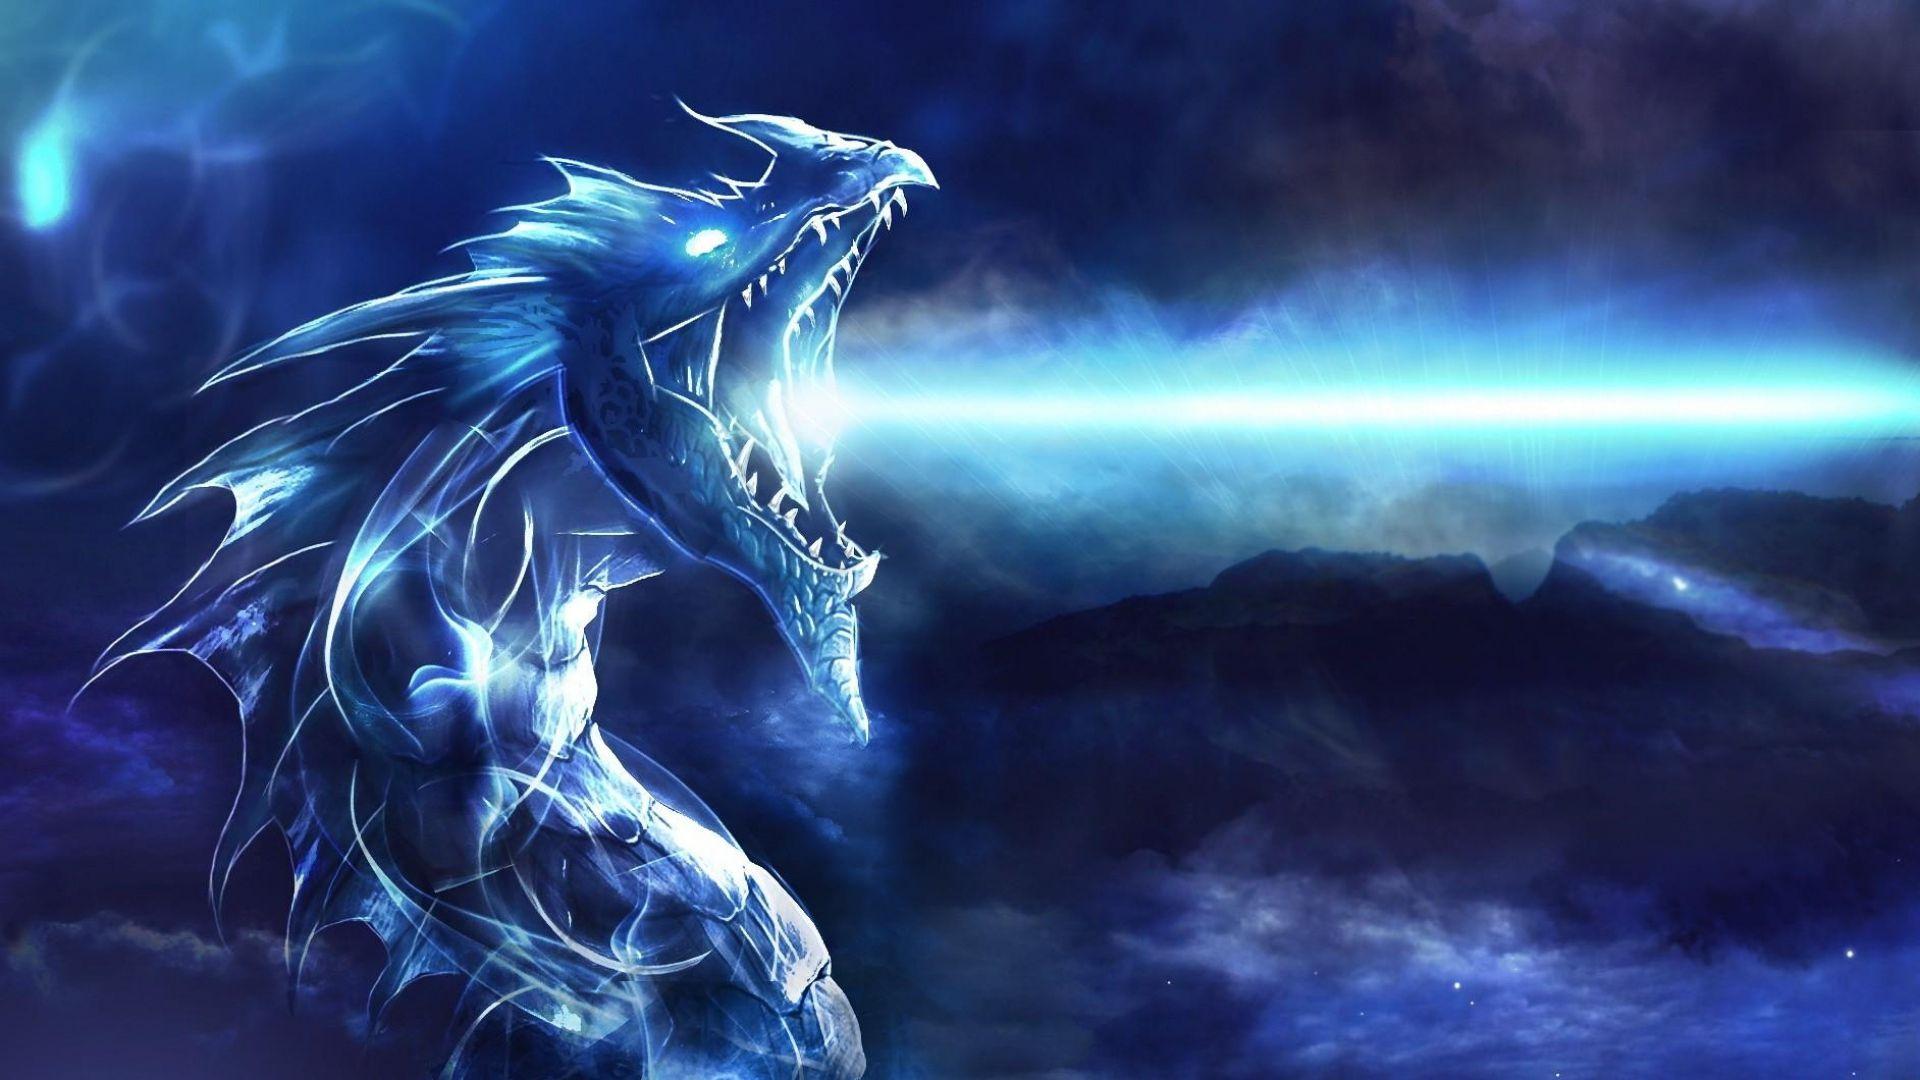 Top 30 Lightning Dragon GIFs  Find the best GIF on Gfycat